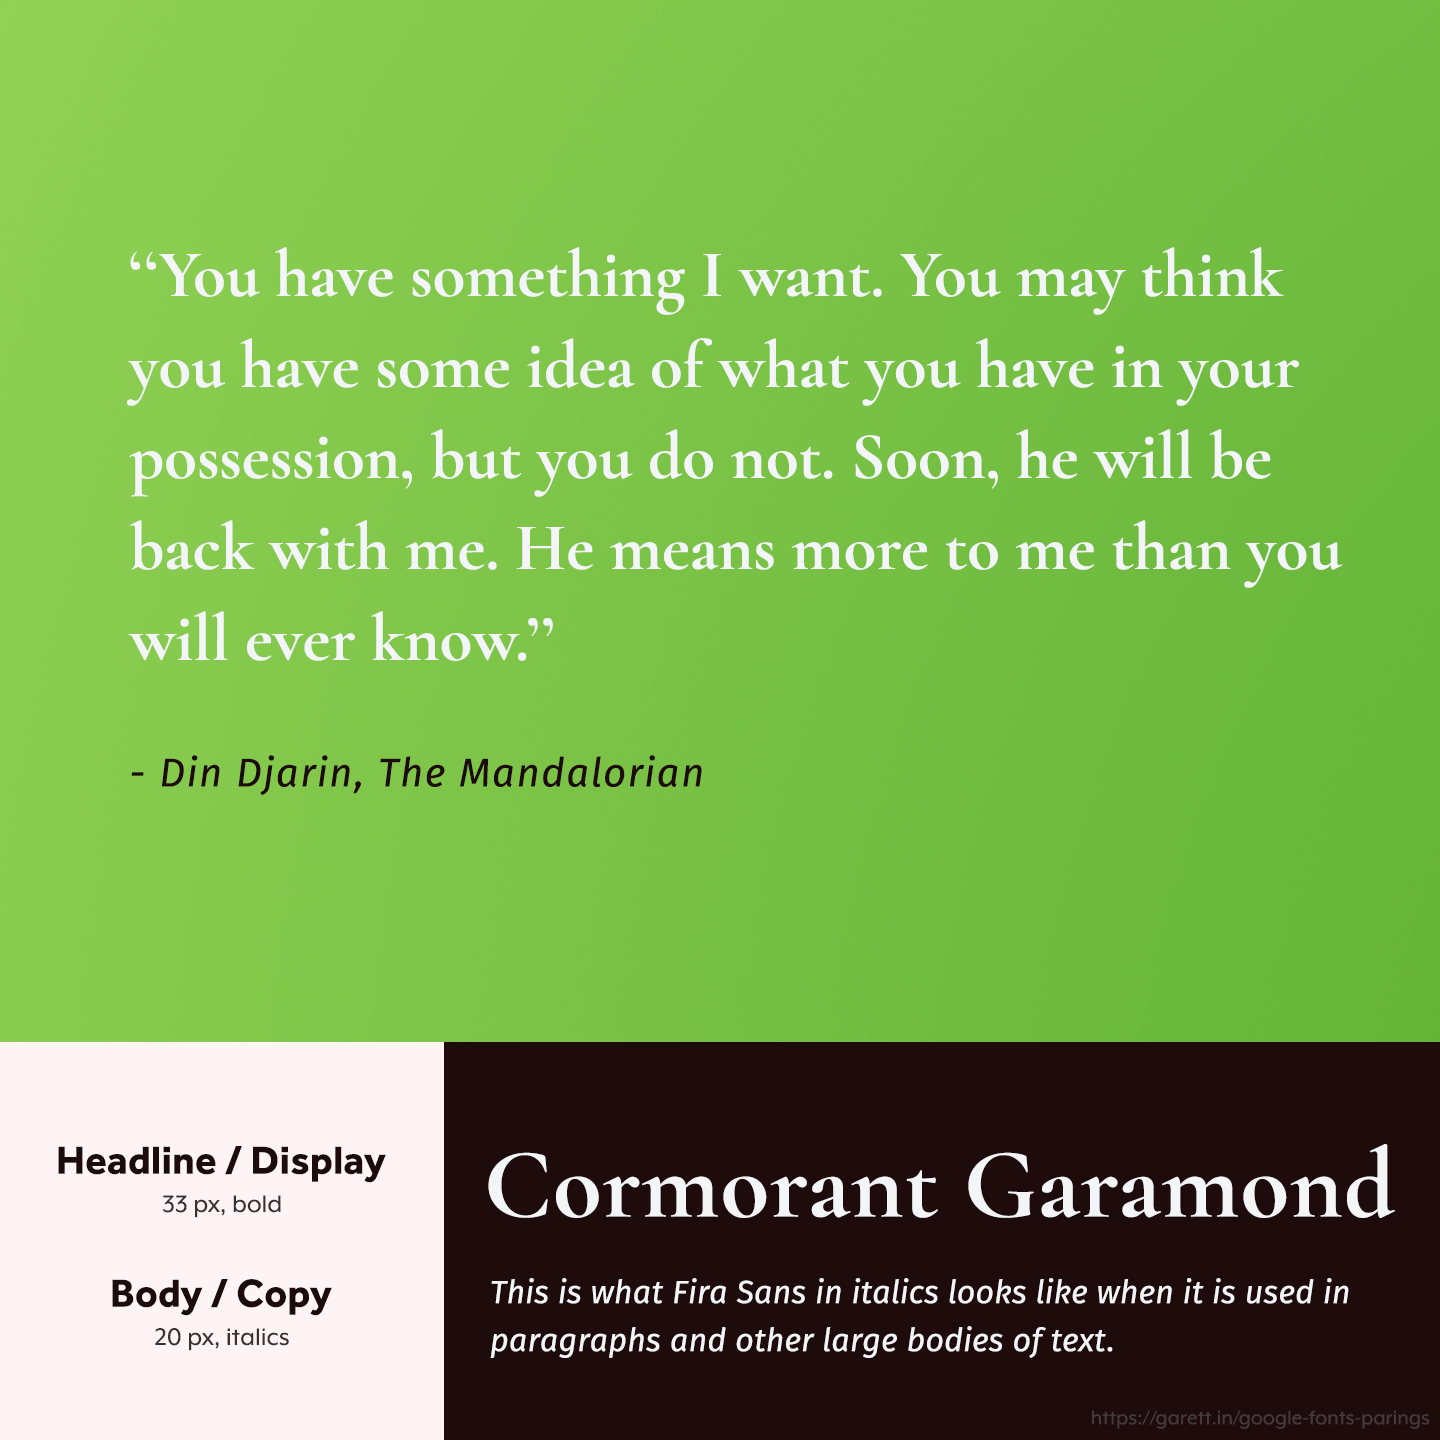 Cormorant Garamond and Fira Sans font pairing - 30 Google Font Pairings for Your Brand and Website